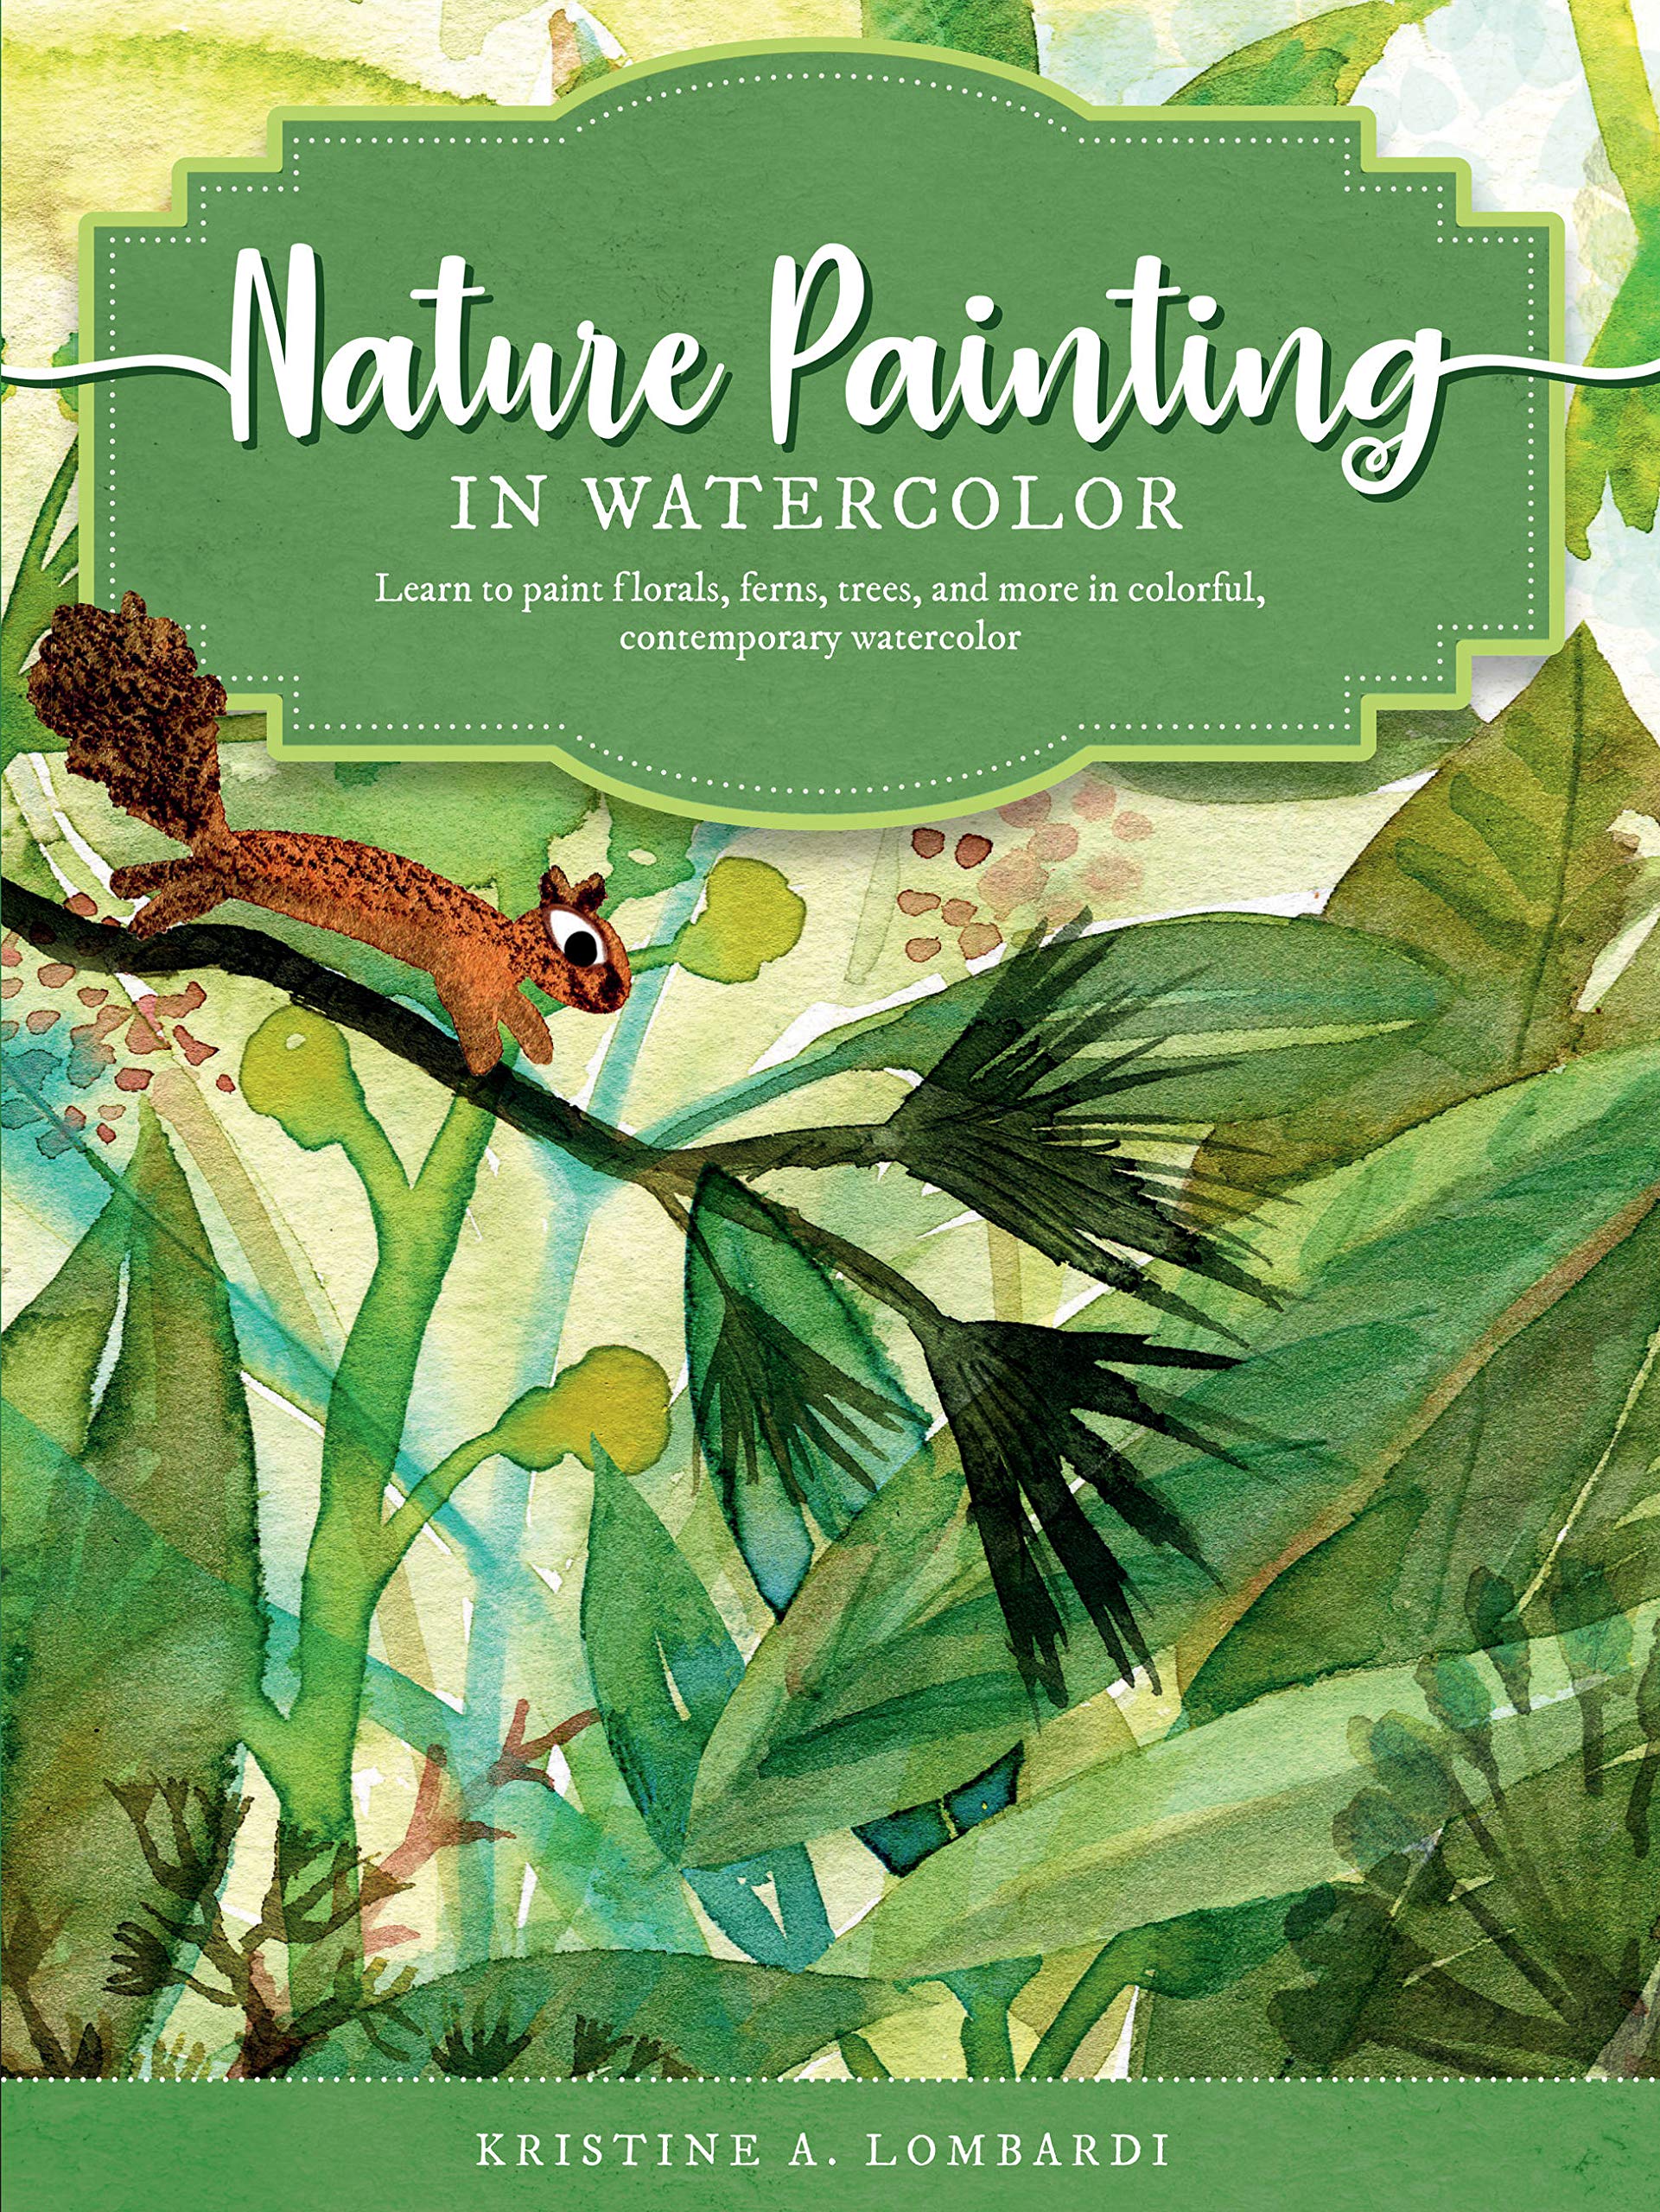 Nature Painting in Watercolor | Kristine A. Lombardi